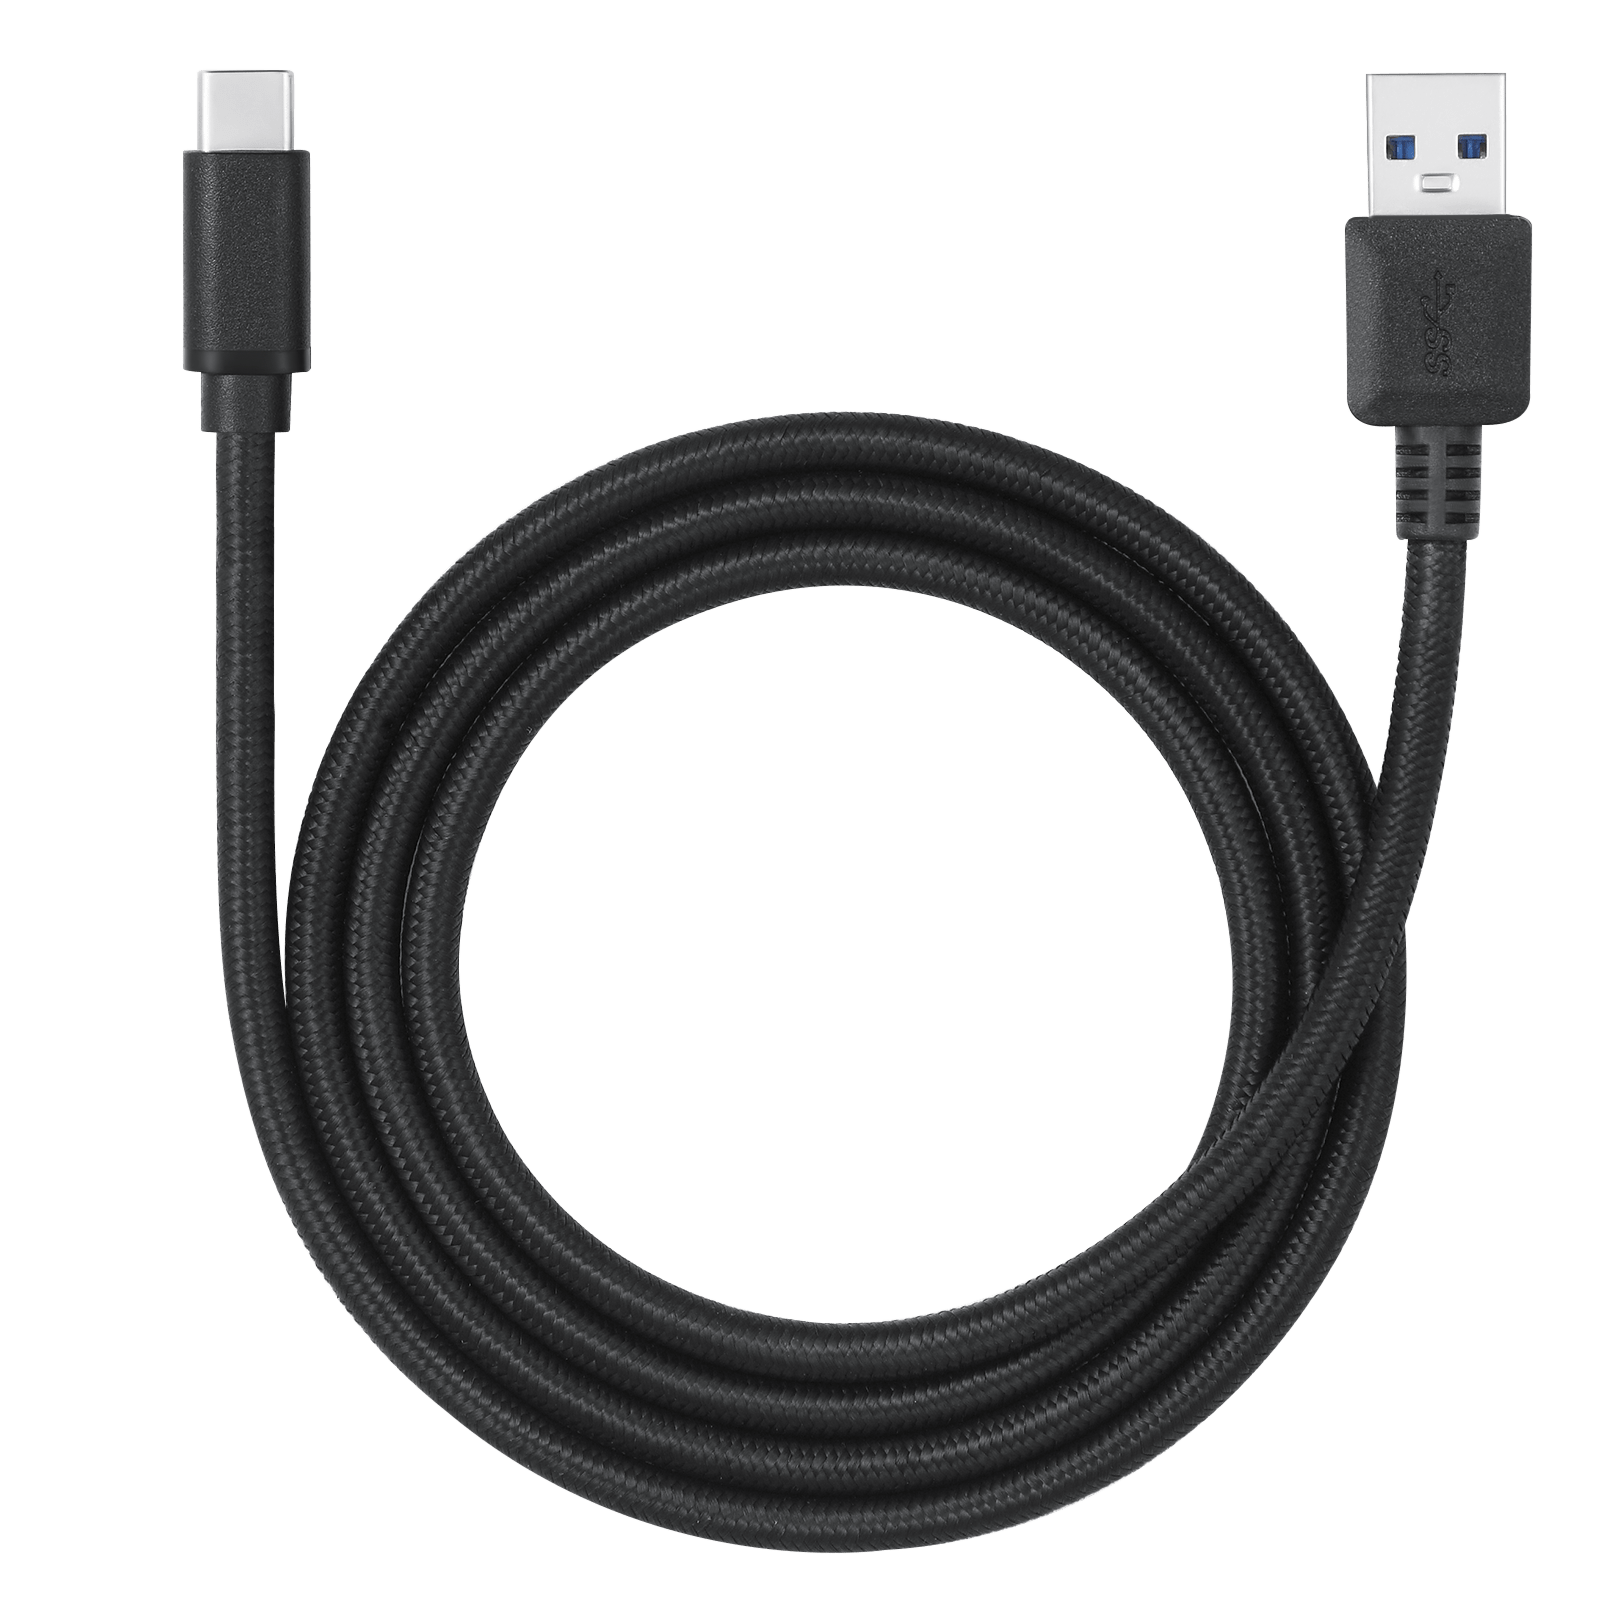 PERIPRO-407 - USB-C to USB-A Braided Cable Adapter High Speed Transfer - Perixx Europe